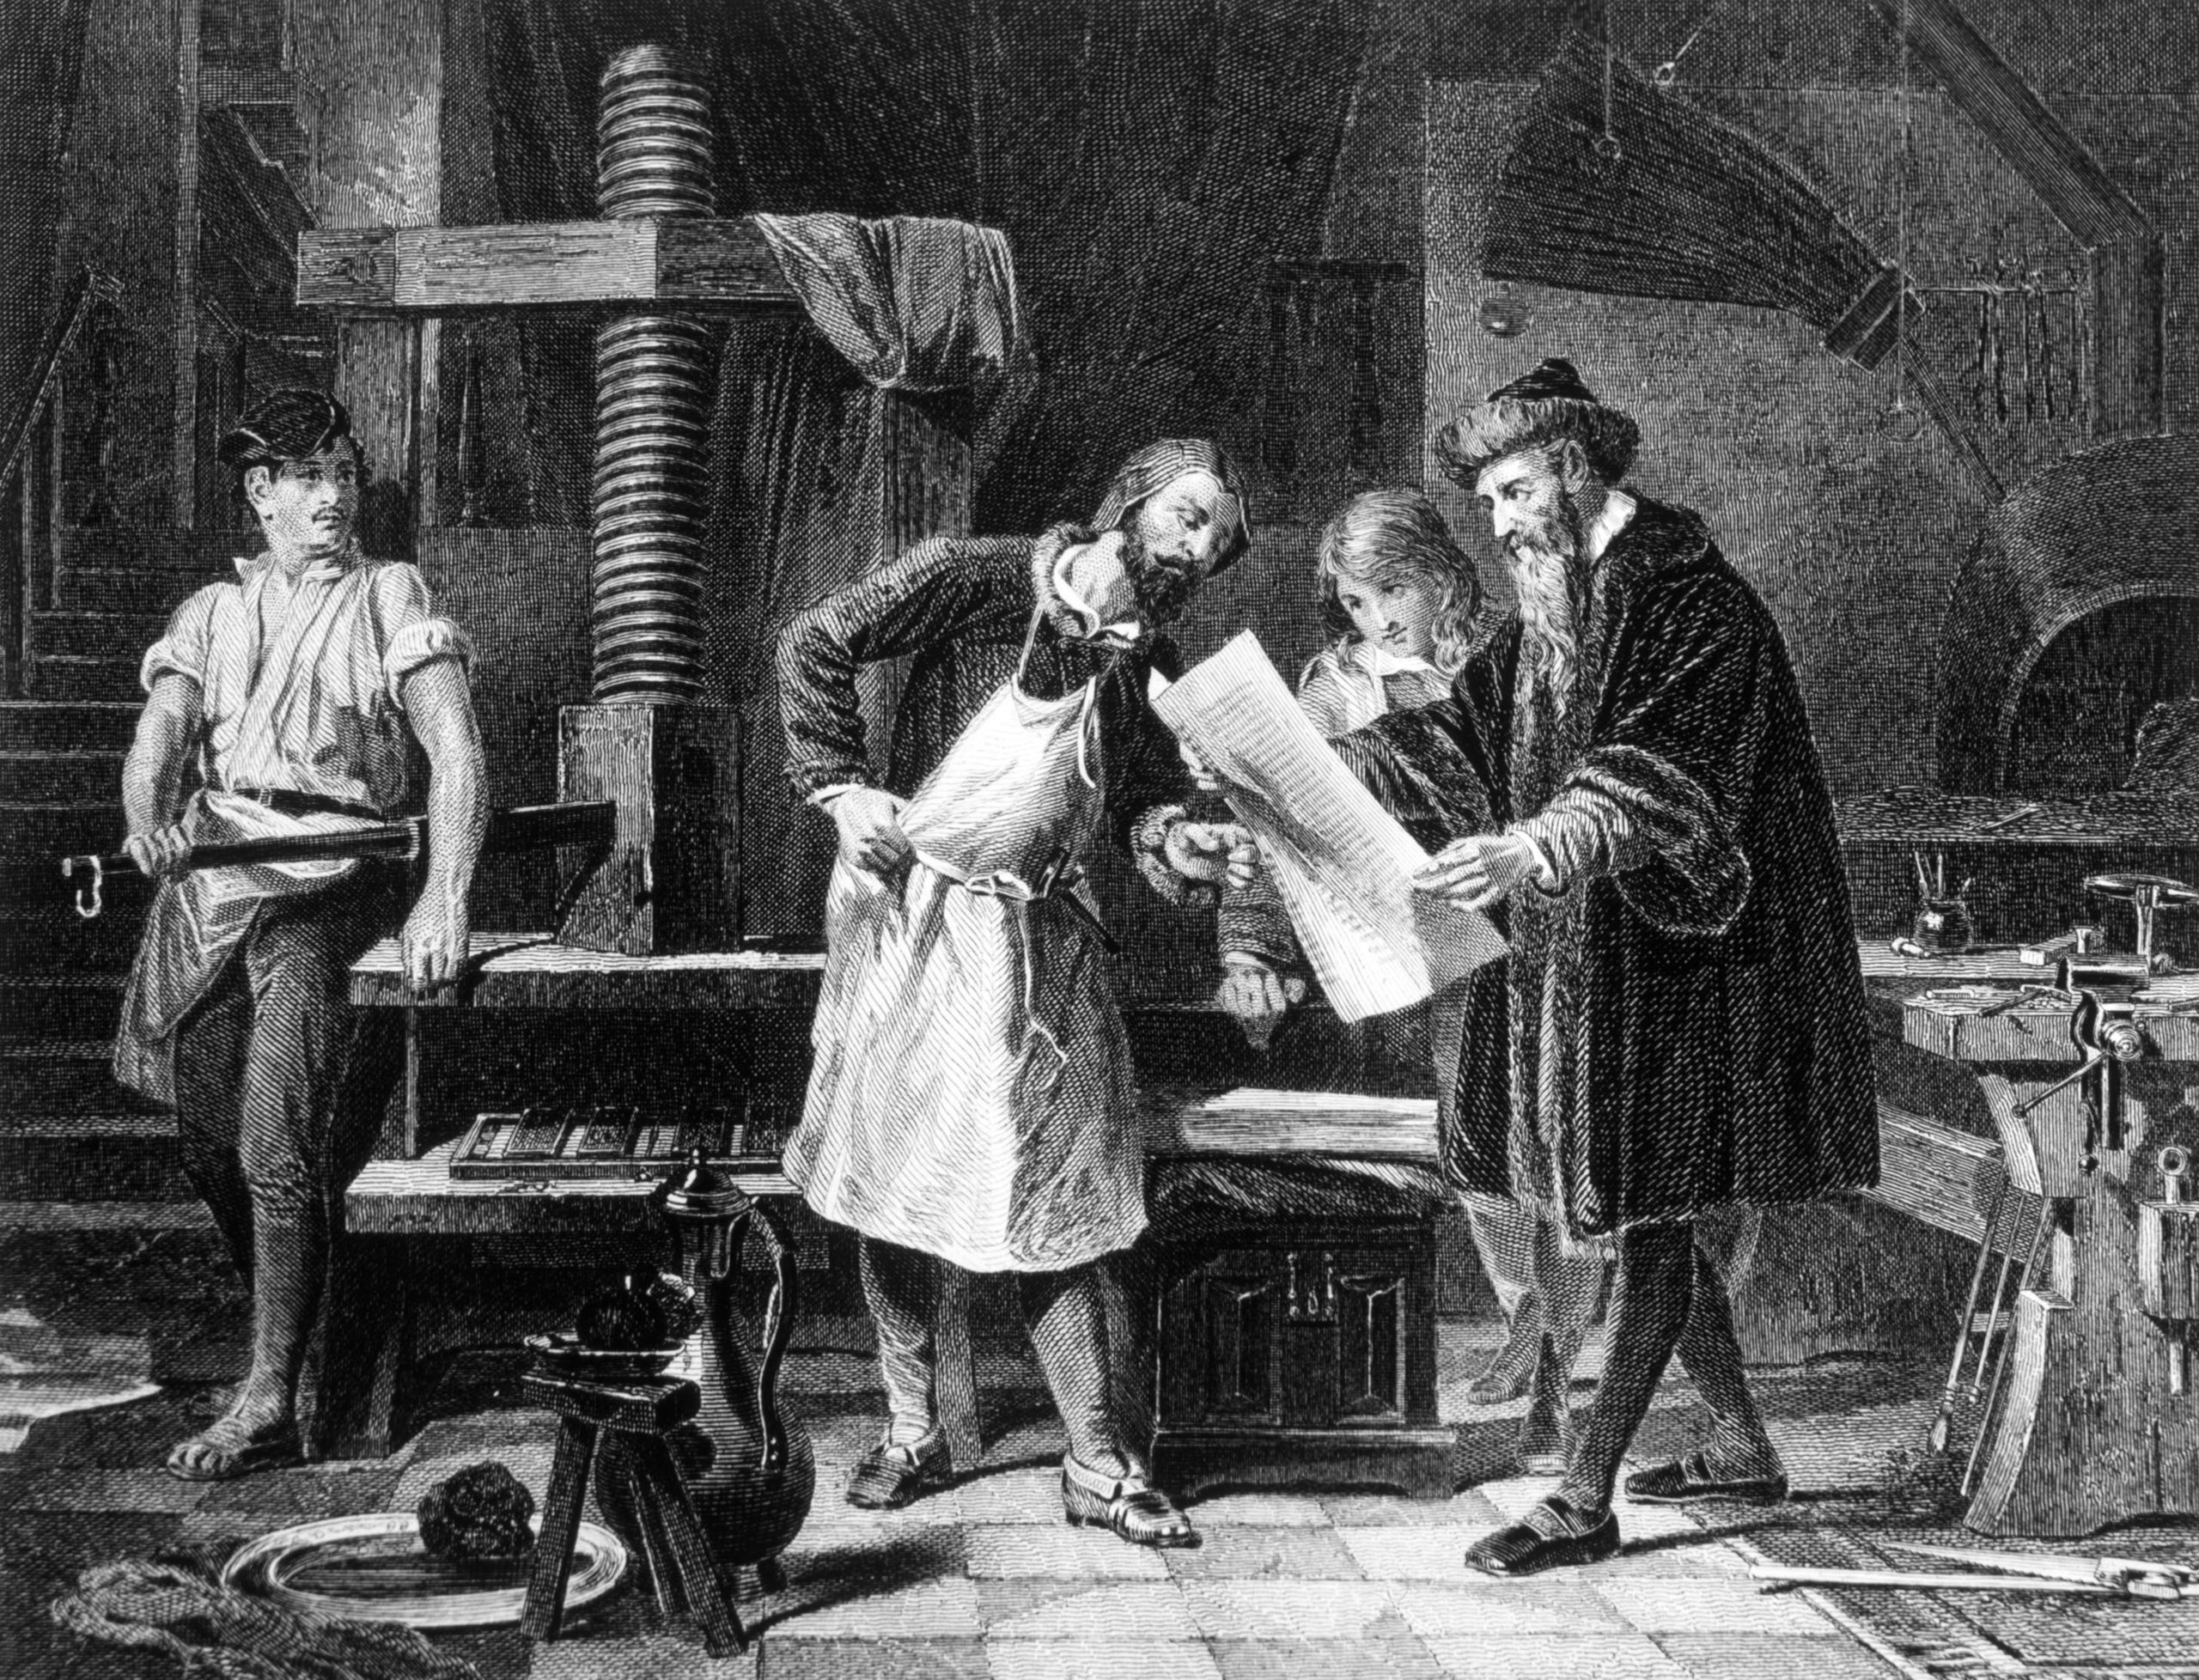 The Gutenberg Revolution: How the printing press shaped humanity and what it means for AI